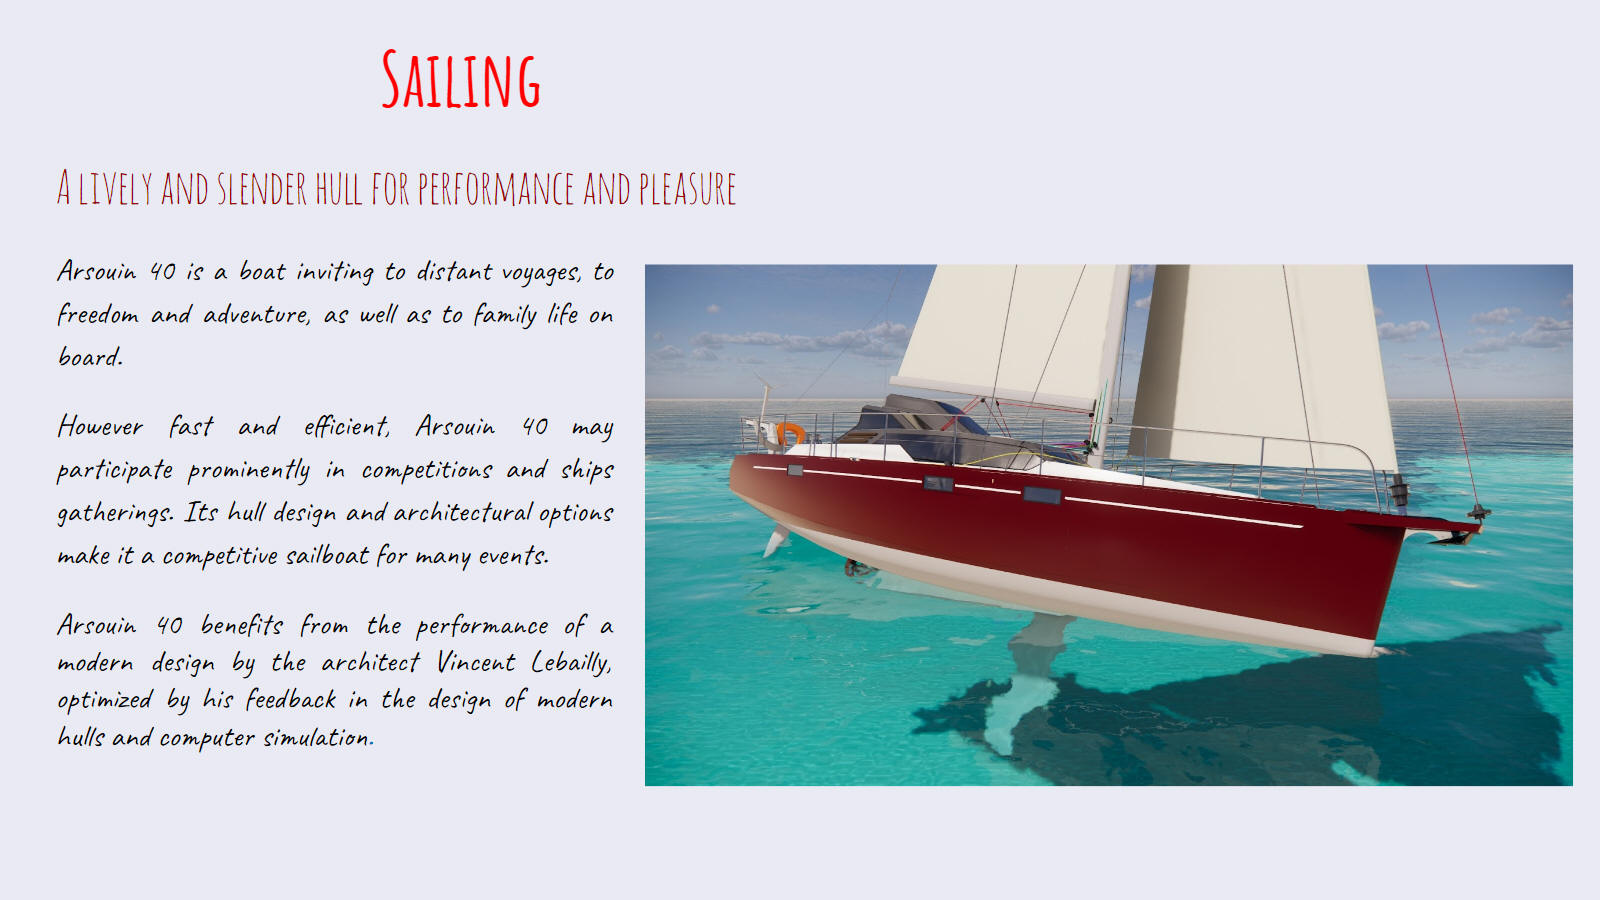 Sail with a hybrid-electrics cruising and lifting keel sailboat. A lively and slender hull for performance and pleasure.